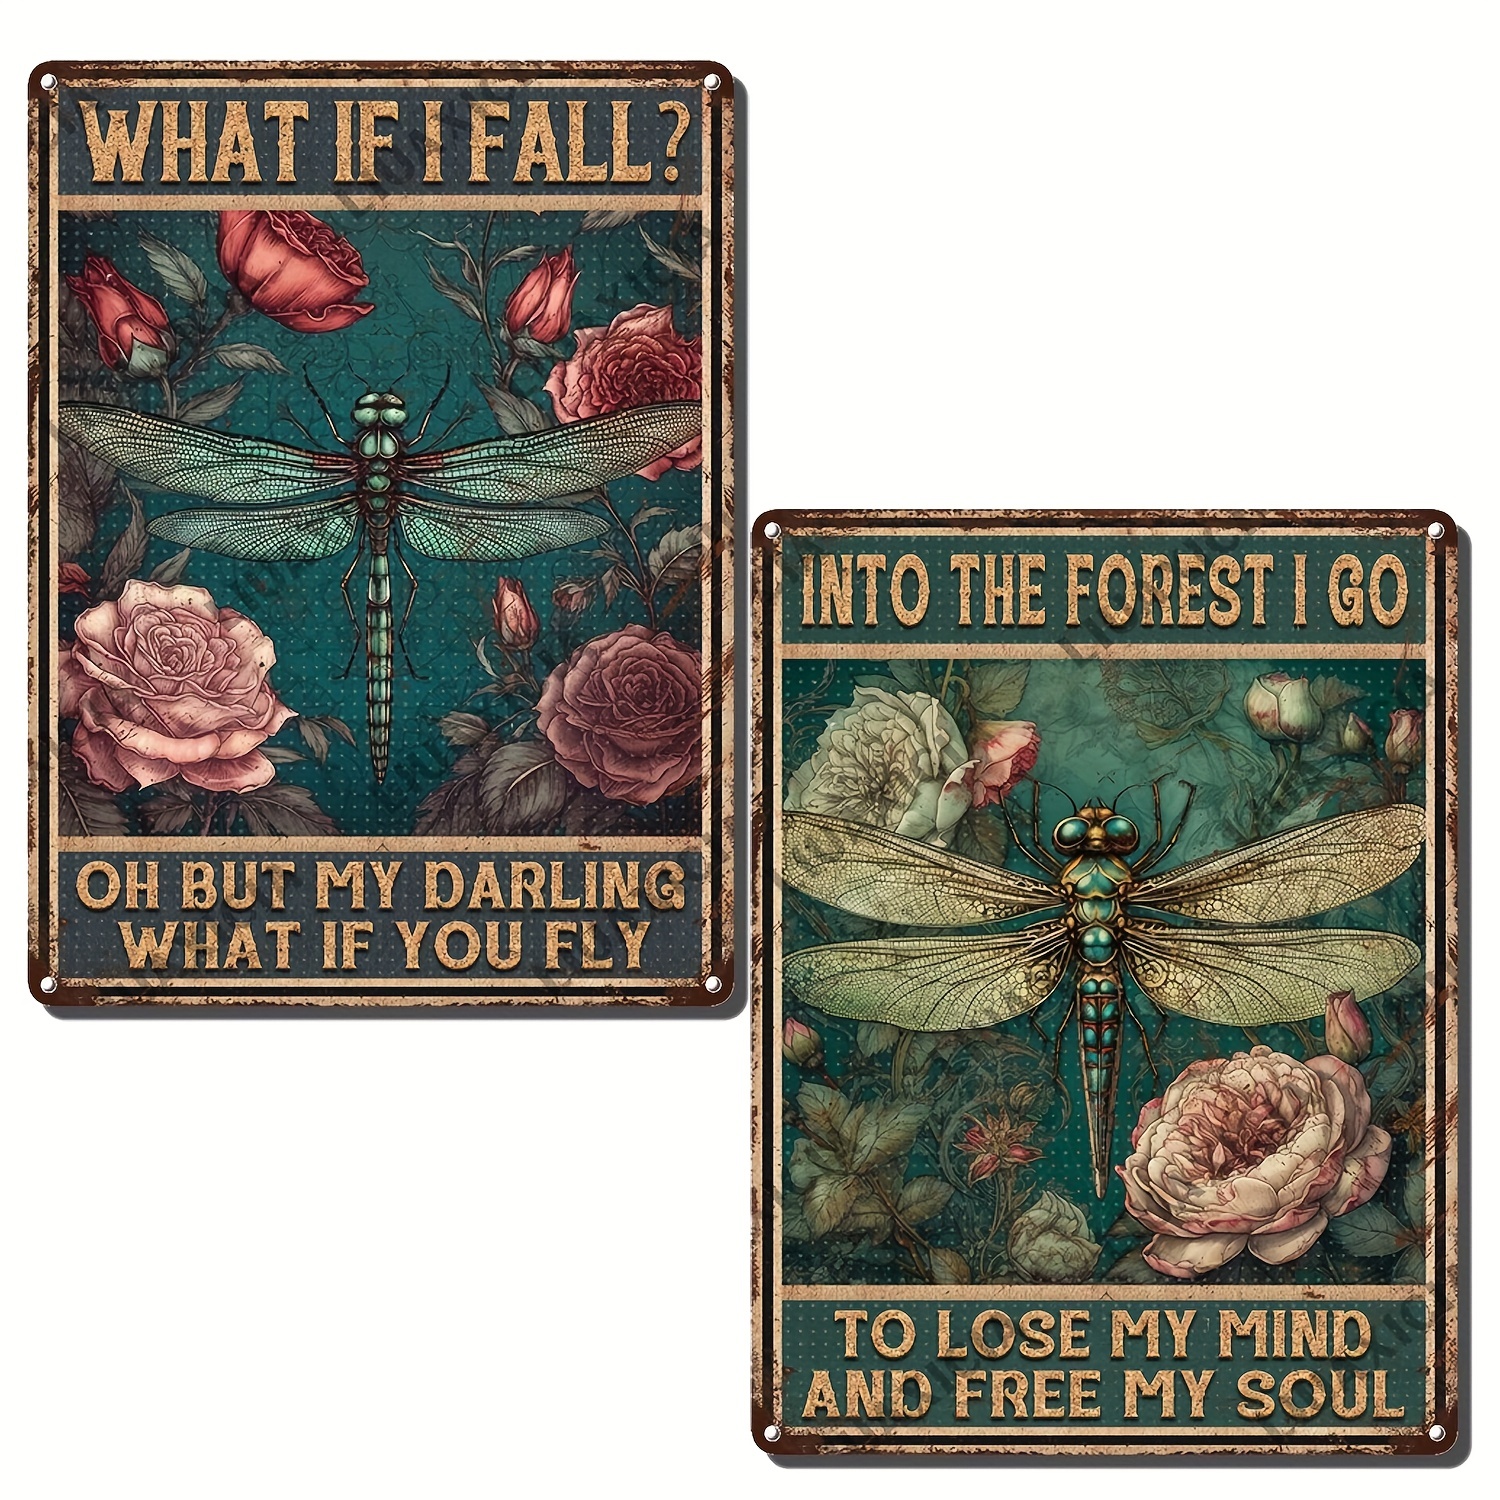 

1pc Retro Dragonfly Tin Sign, Into The Forest What If I Fall Funny Metal Sign, Wall Poster, Garden, Bar, Yard, Outdoor Decor 8x12inch